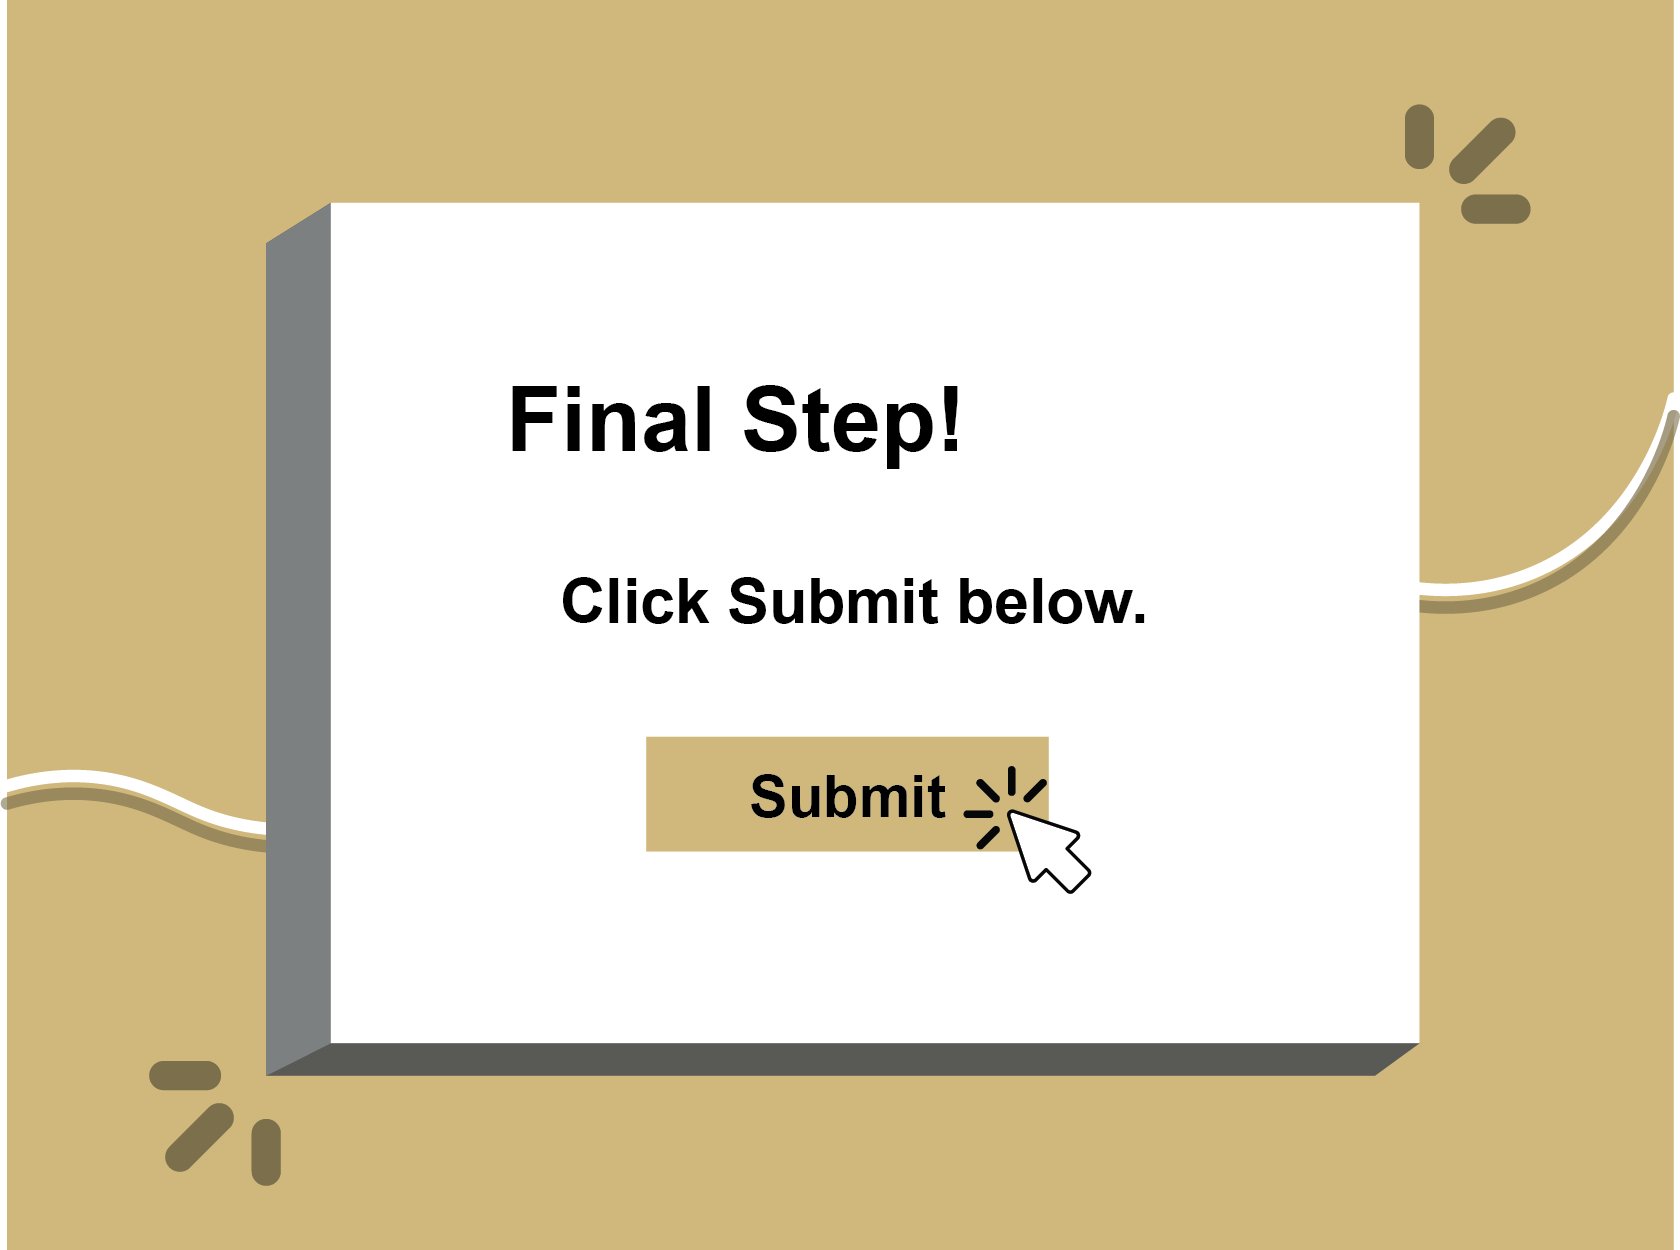 Final step click and submit below